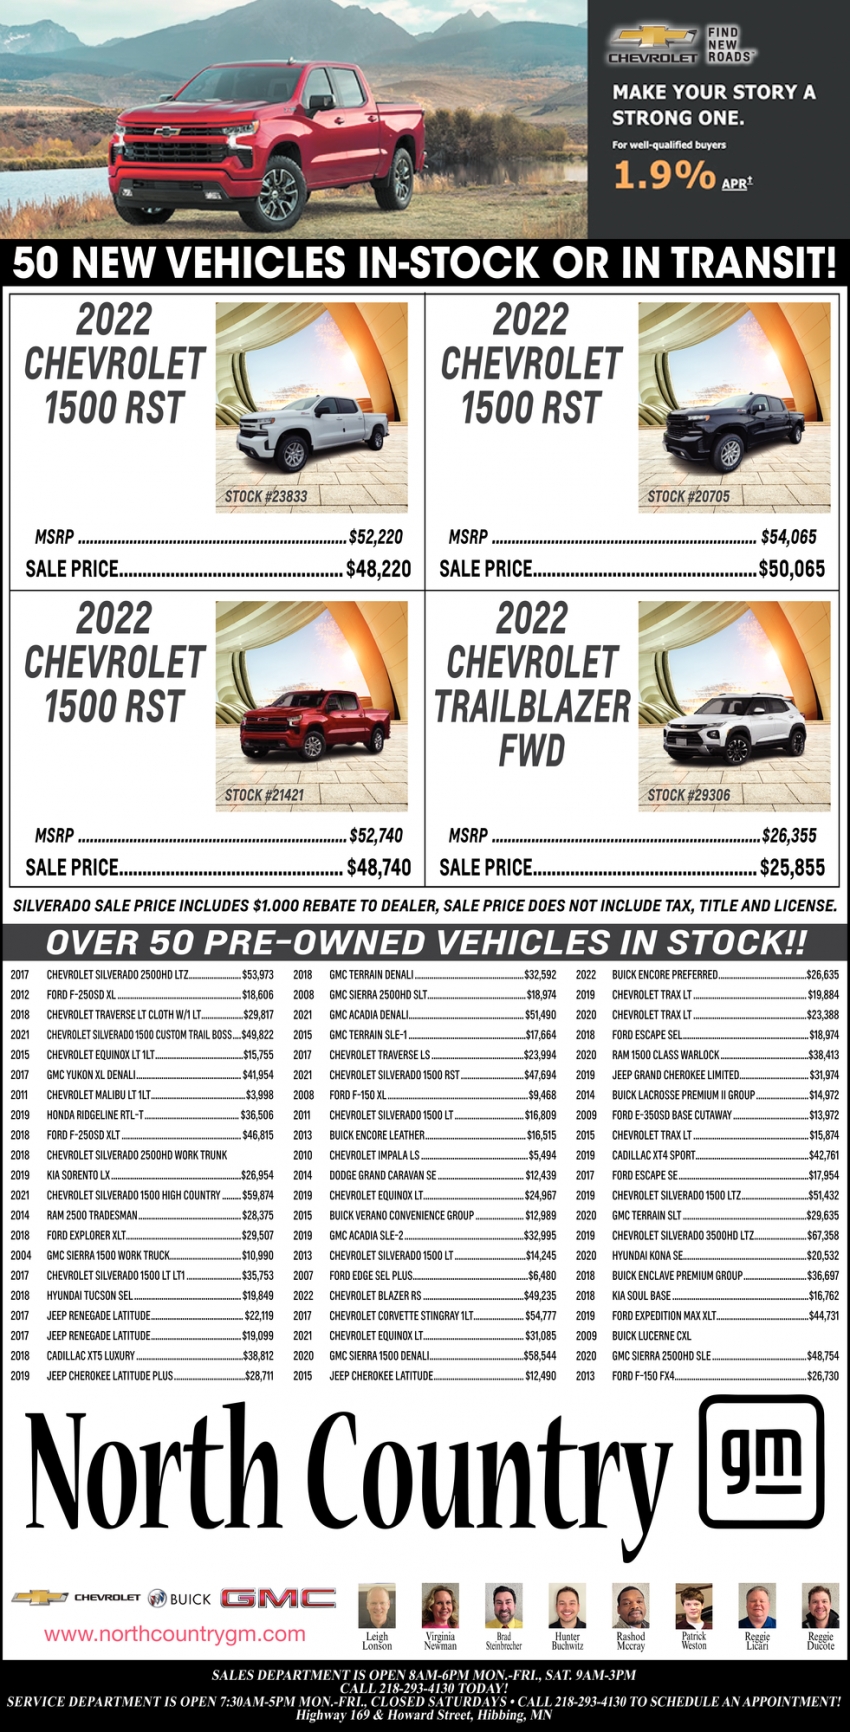 50 New Vehicles In-Stock Or In Transit!